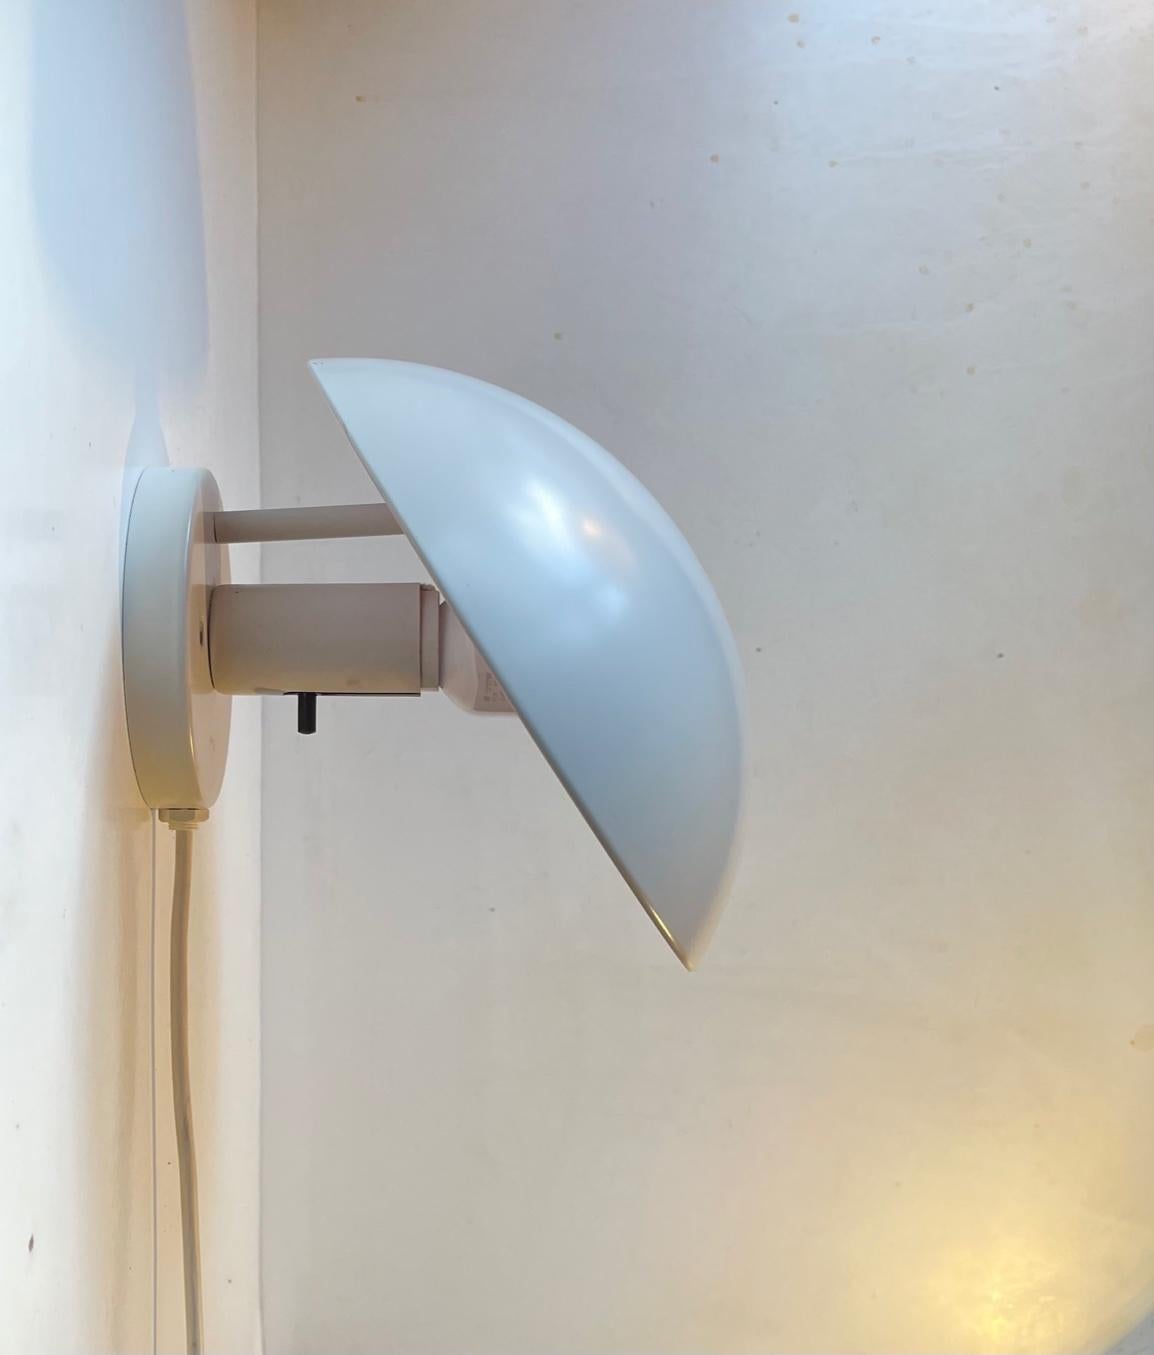 1st series white PH Hat wall lamp designed by Poul Henningsen in the late 1970s and manufactured by Louis Poulsen in Denmark. It features angle-adjustable shade, original pink lacquer and push-pin on/of switch to the socket. Its labeled with